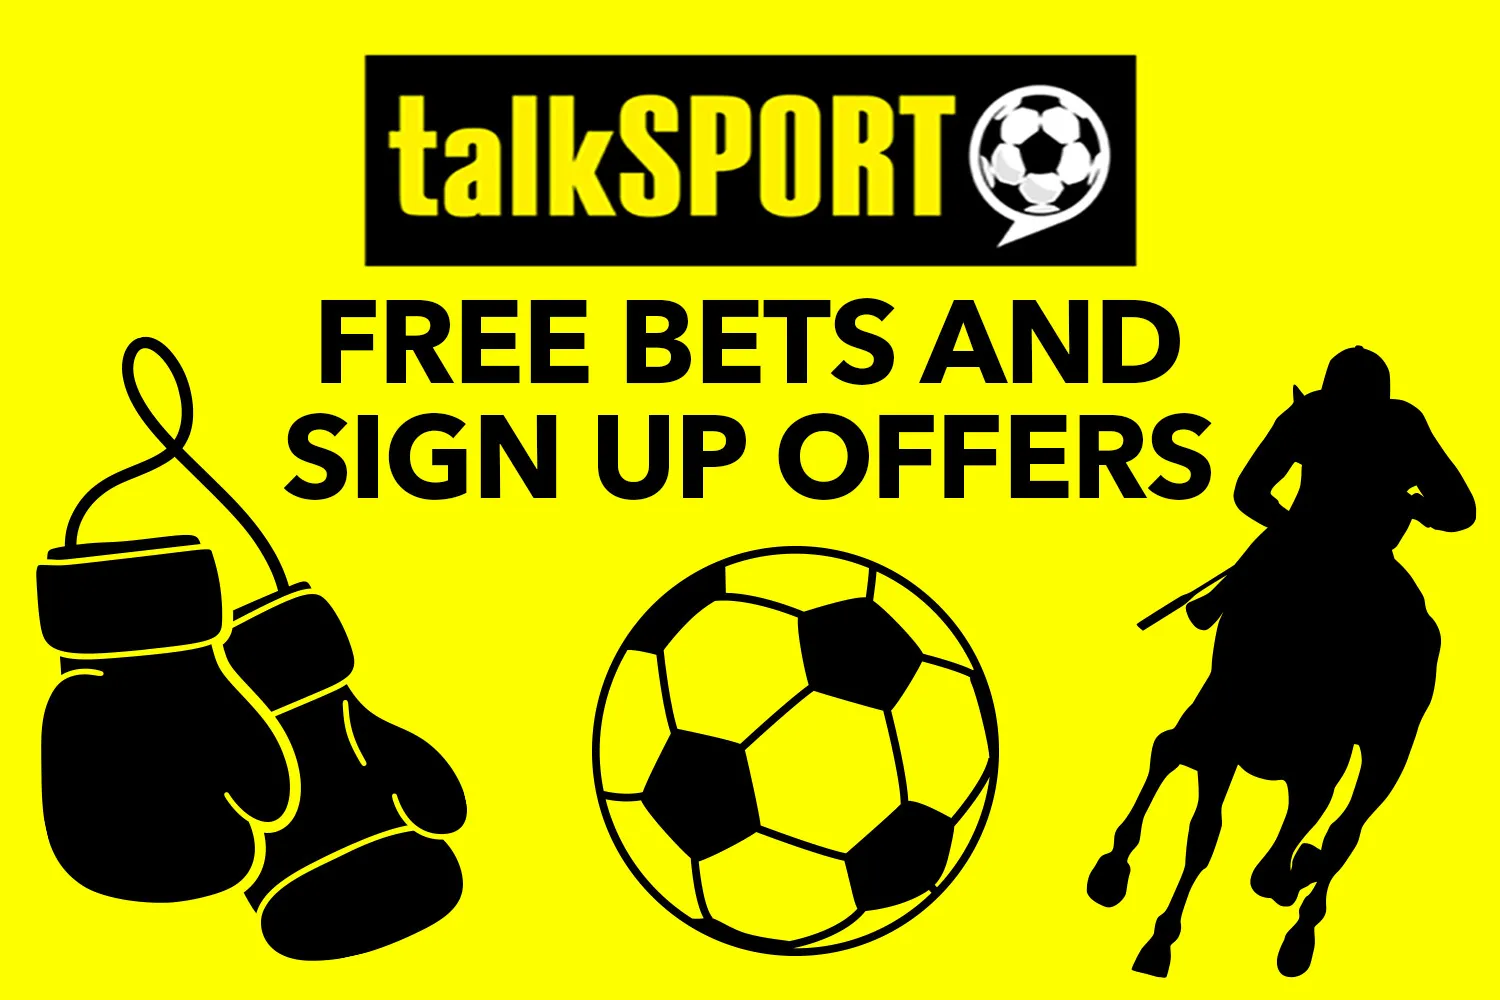 Free bets and offers from Bet365, Betfred, SkyBet and more